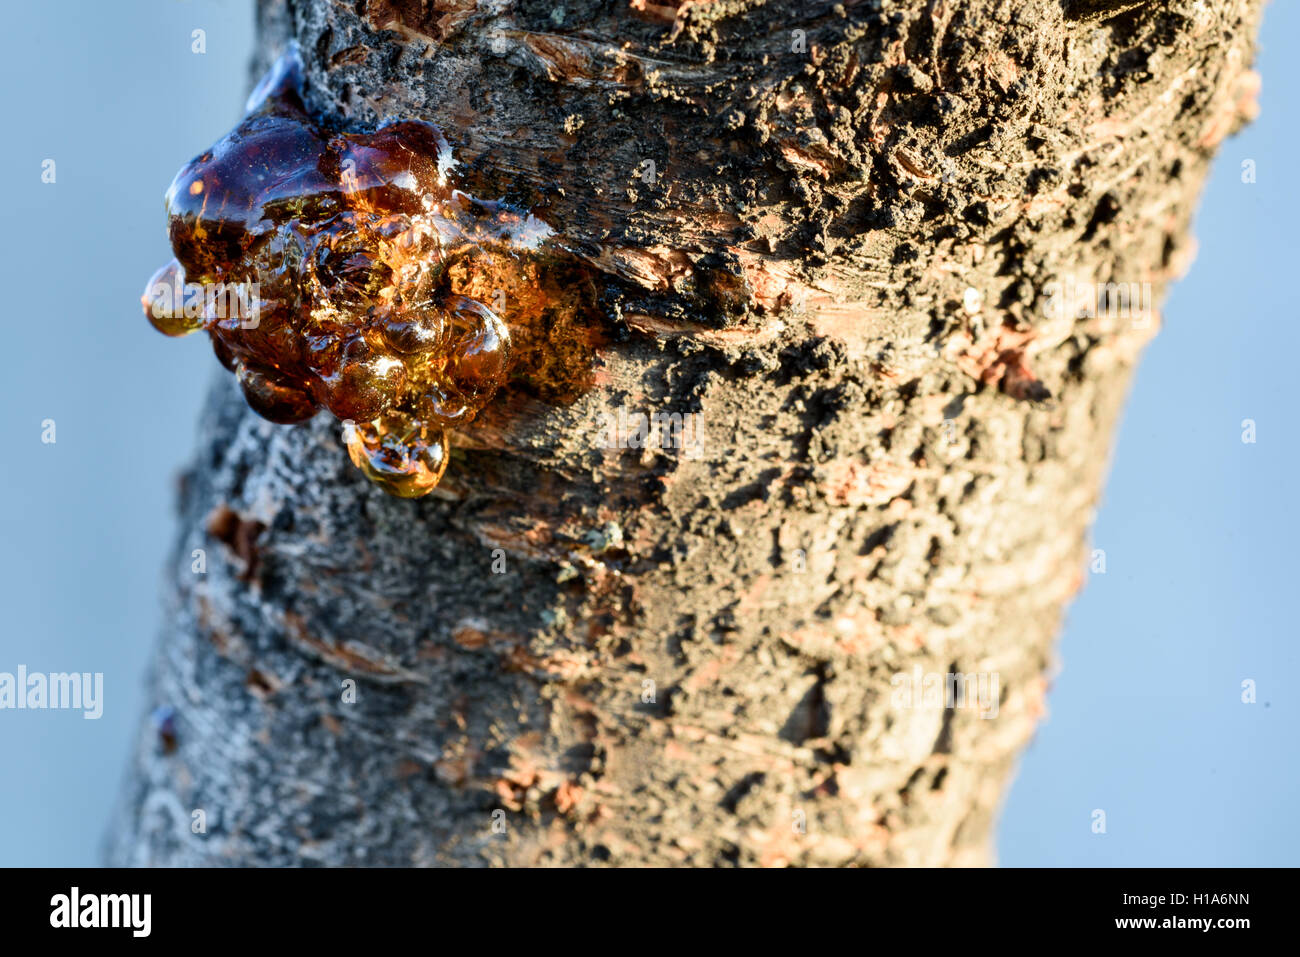 Solid Amber Resin Drops on a Cherry Tree Trunk. Stock Image - Image of  outflow, material: 33030893